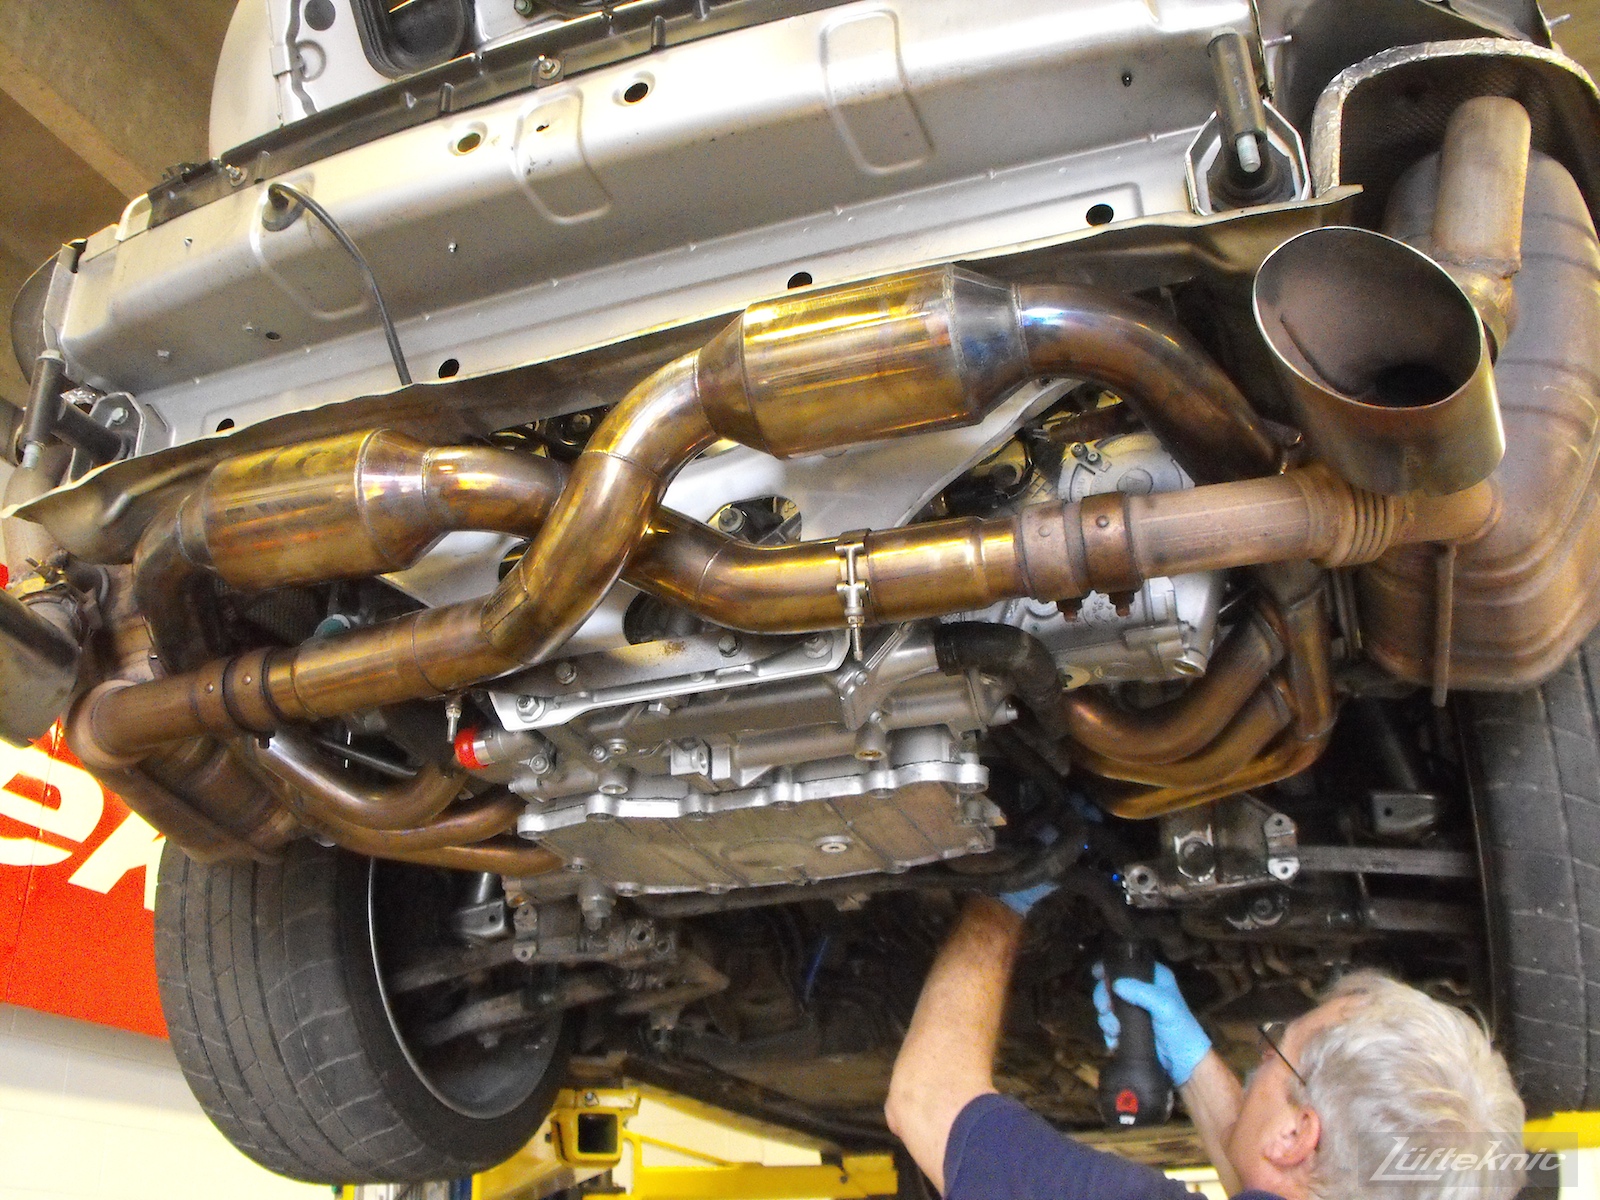 A Porsche 996 Turbo on a lift with the bumper removed showing the sports exhaust and a technician working on another part of the engine.